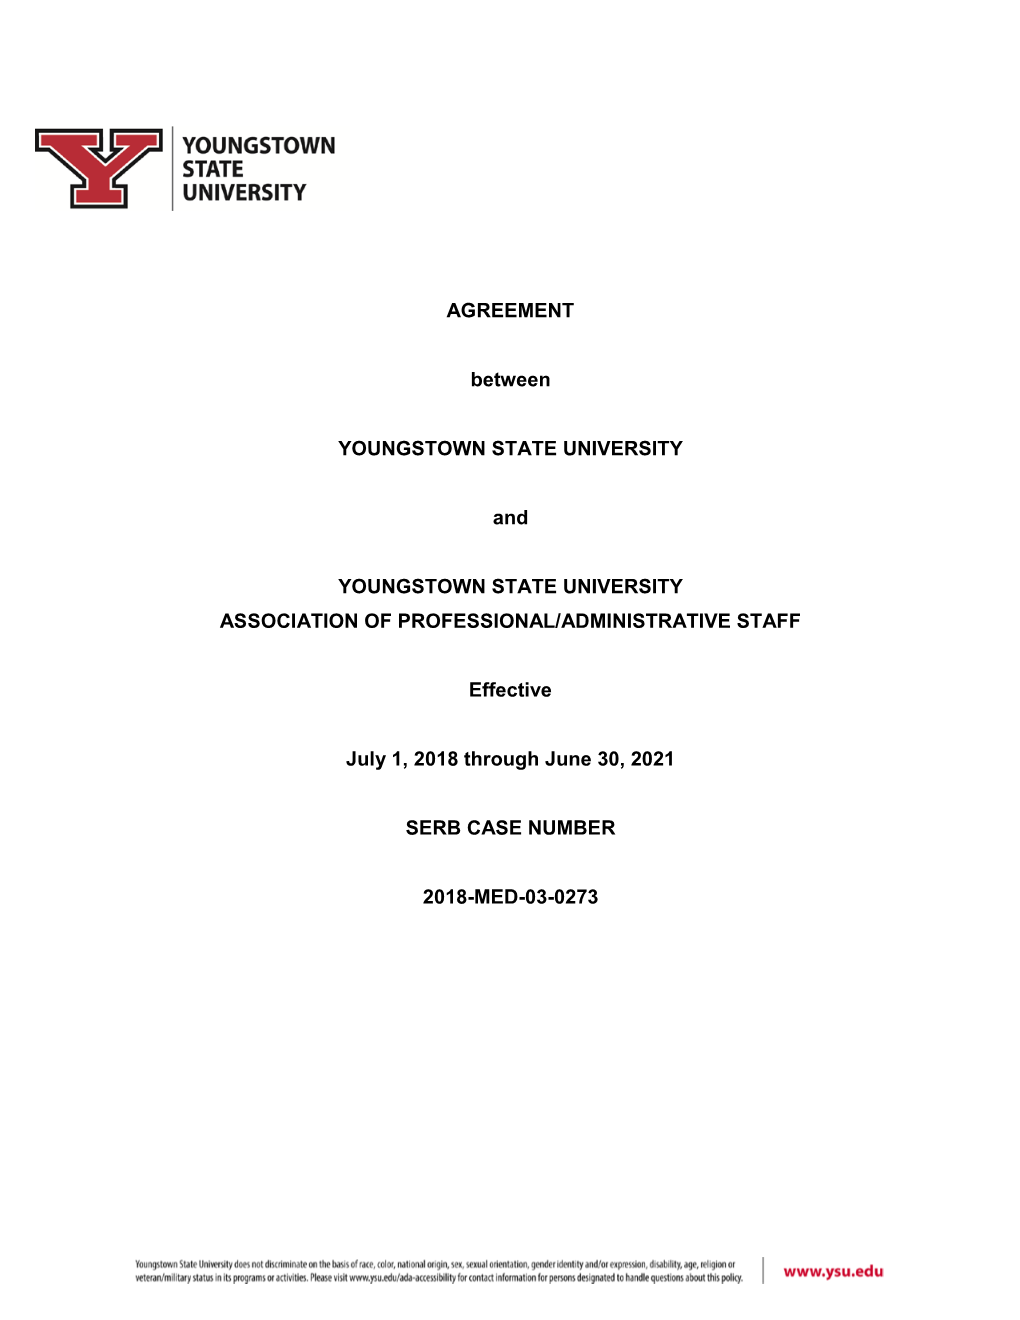 AGREEMENT Between YOUNGSTOWN STATE